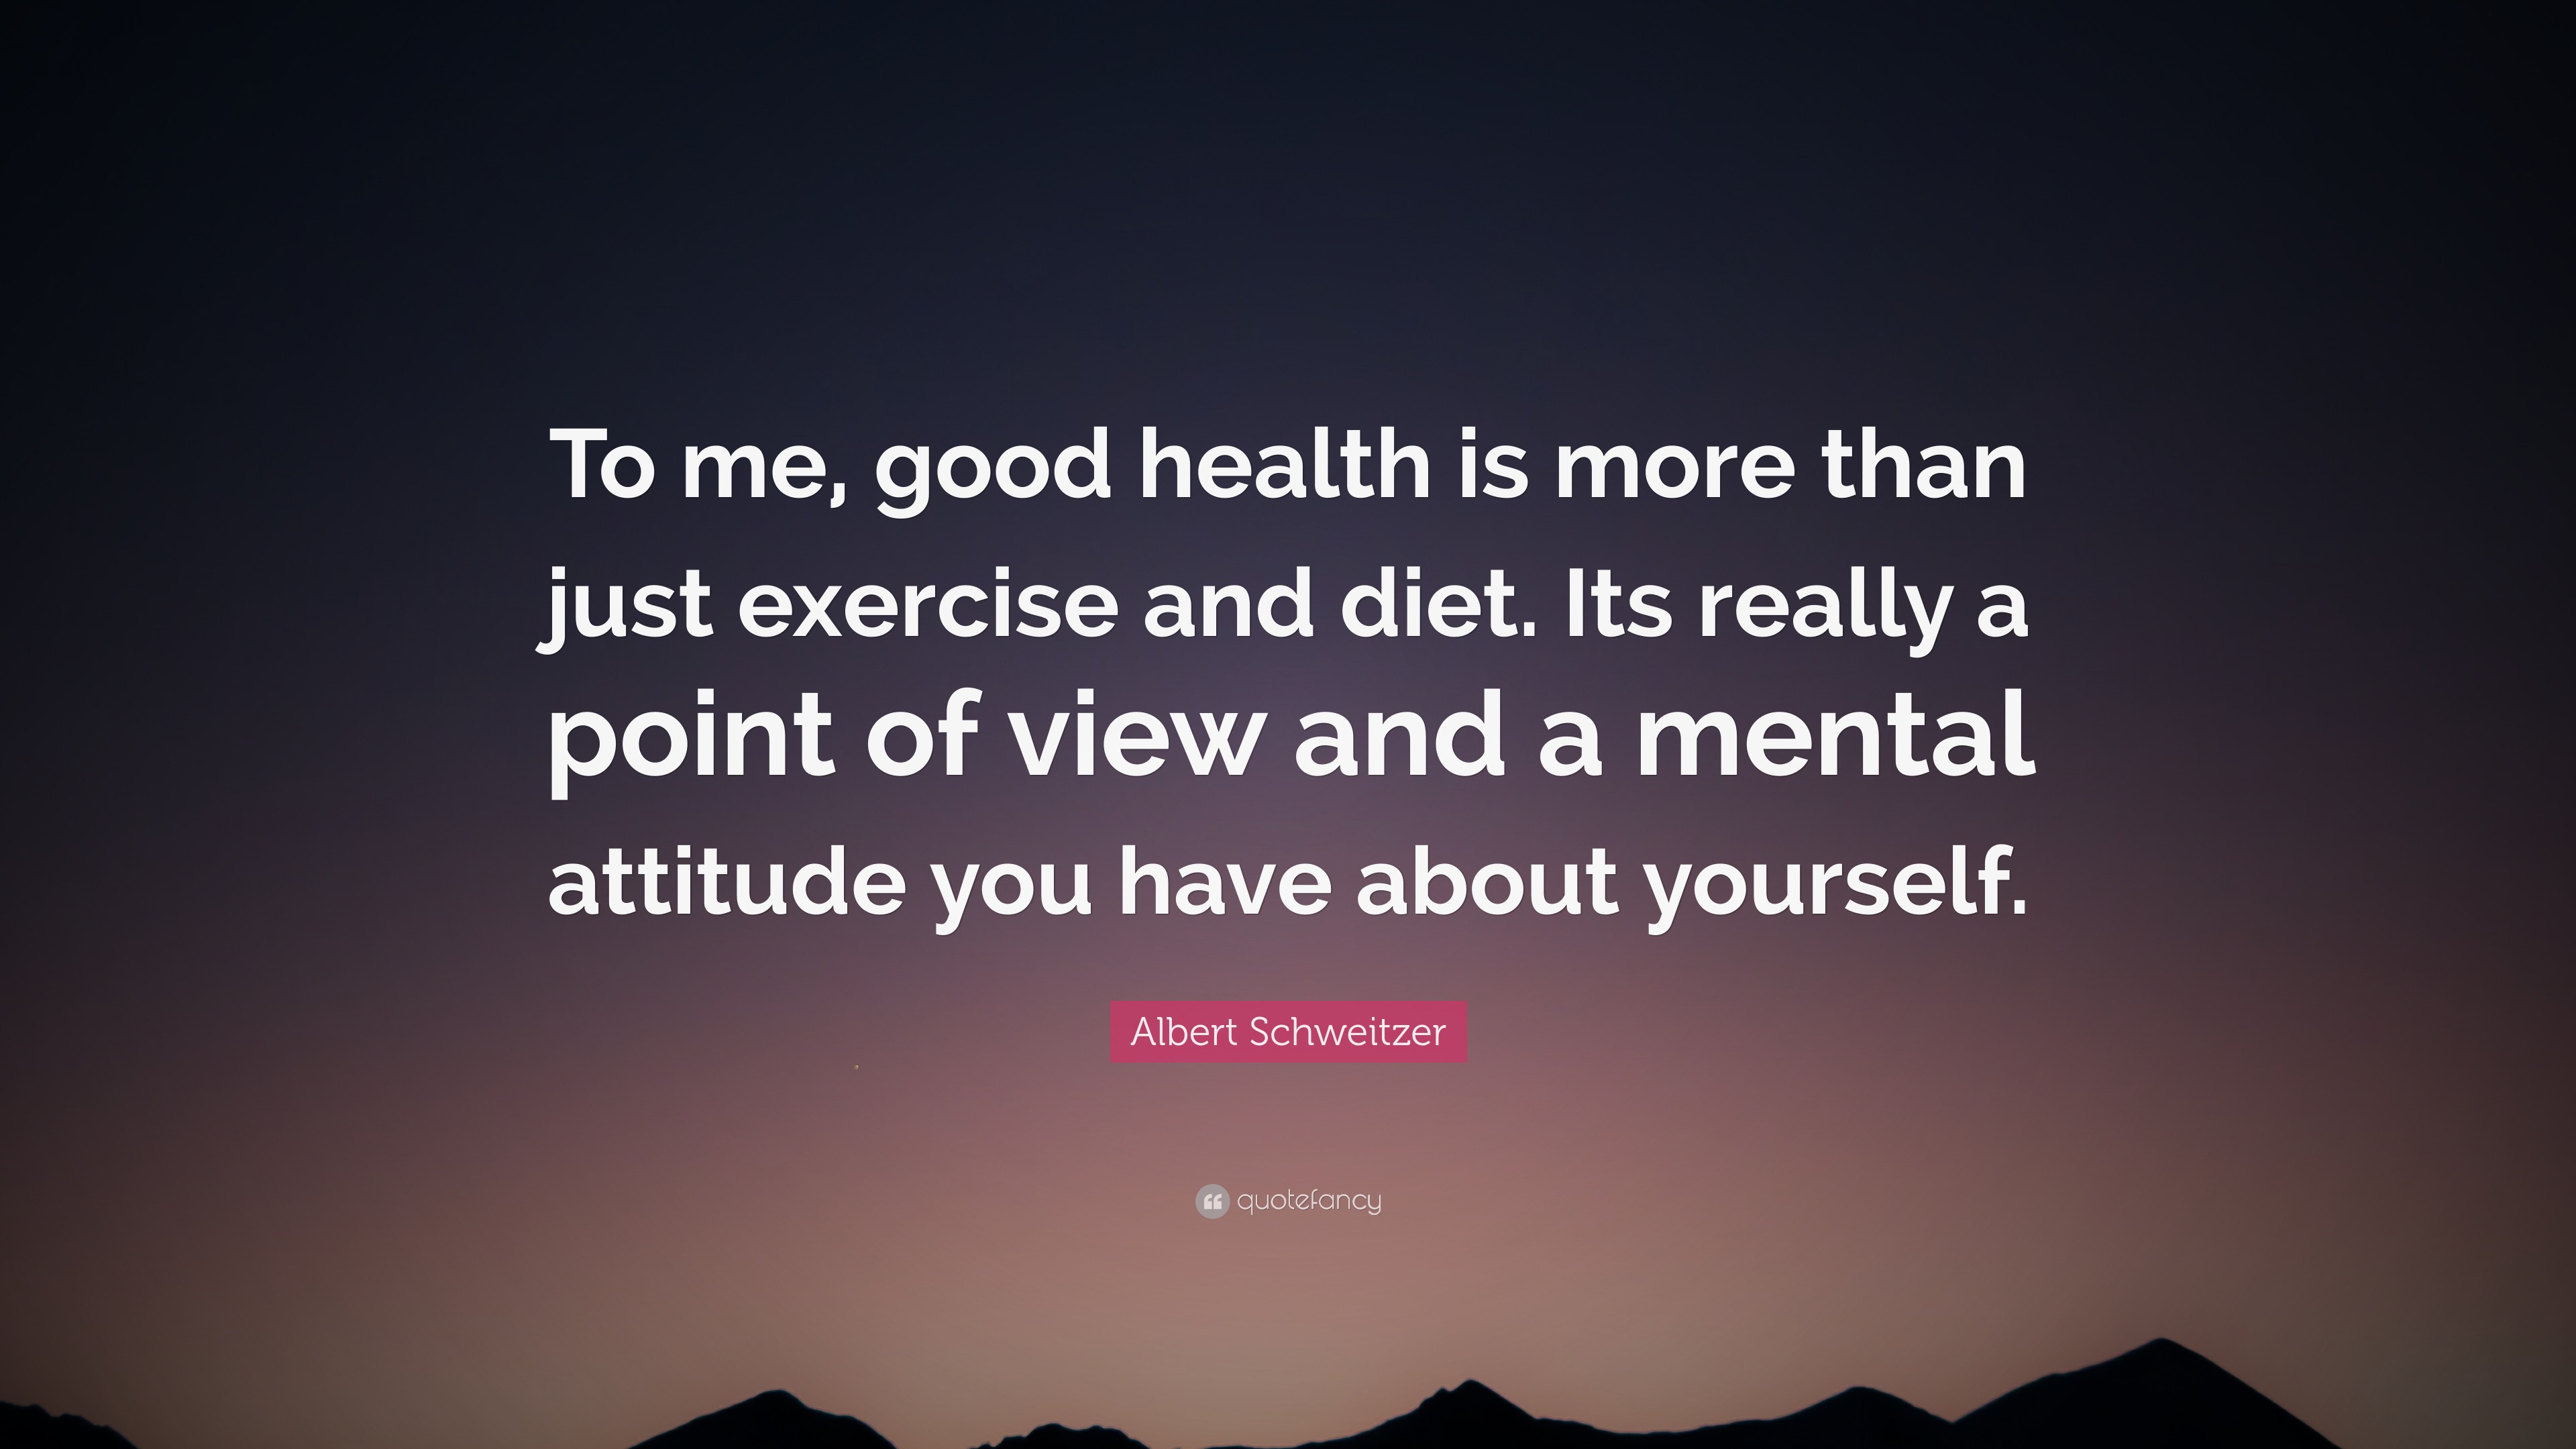 Albert Schweitzer Quote: “To me, good health is more than just exercise ...